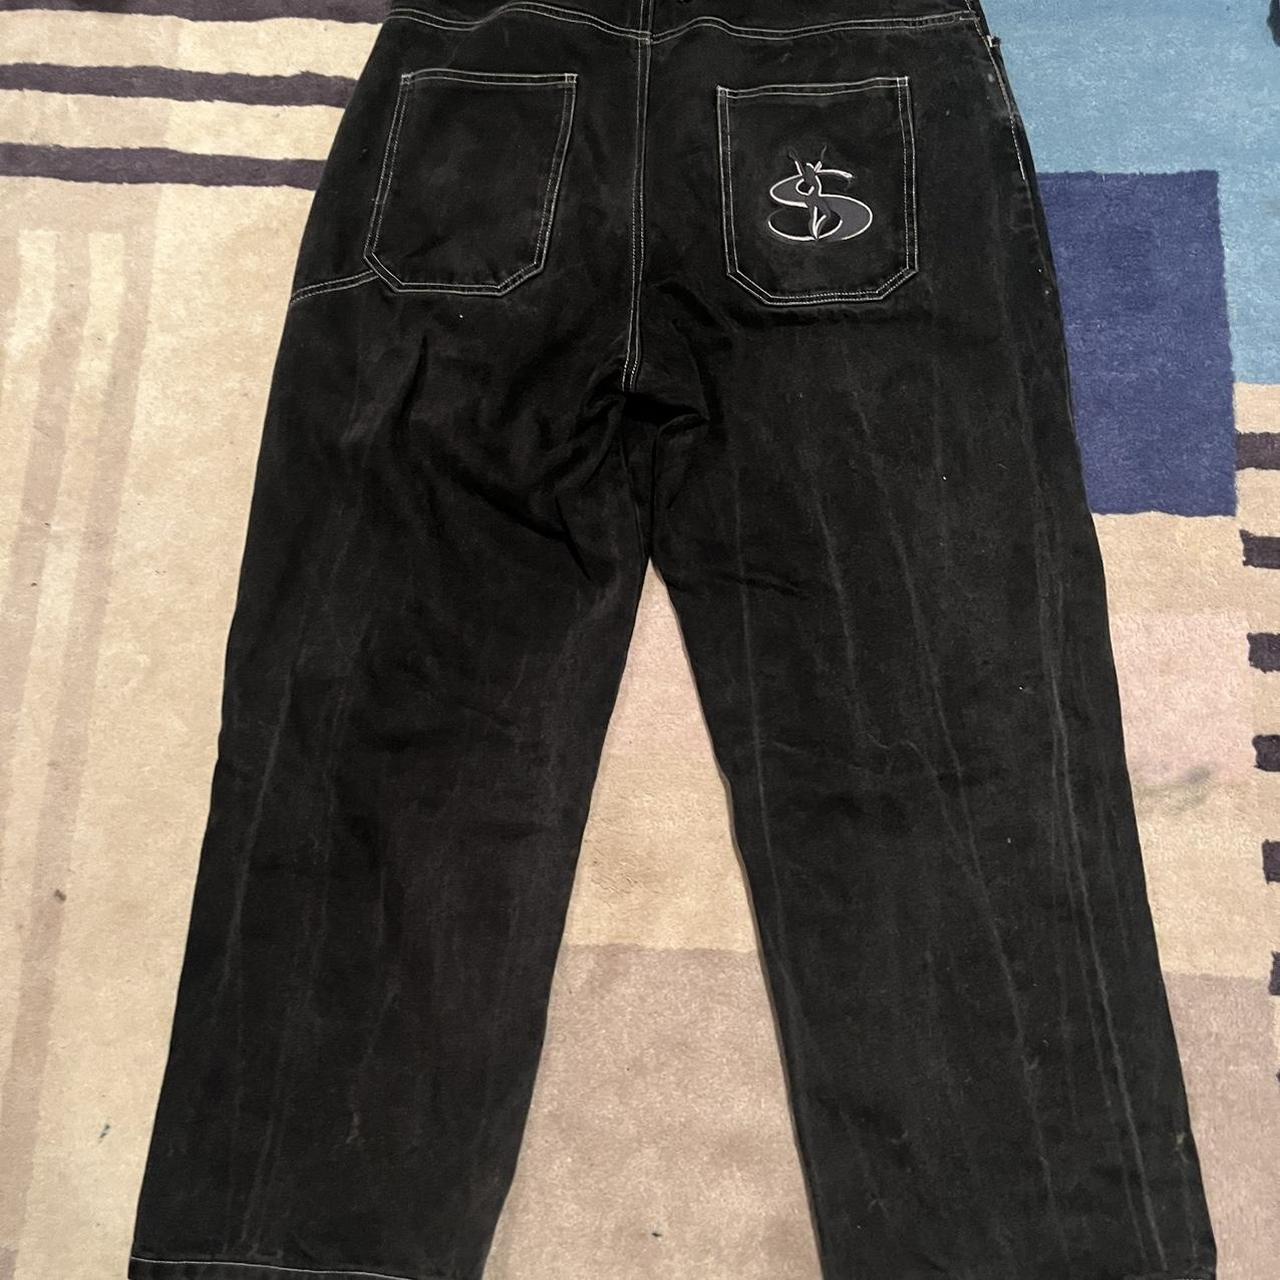 yardsale jeans rare will be washed upon selling not... - Depop